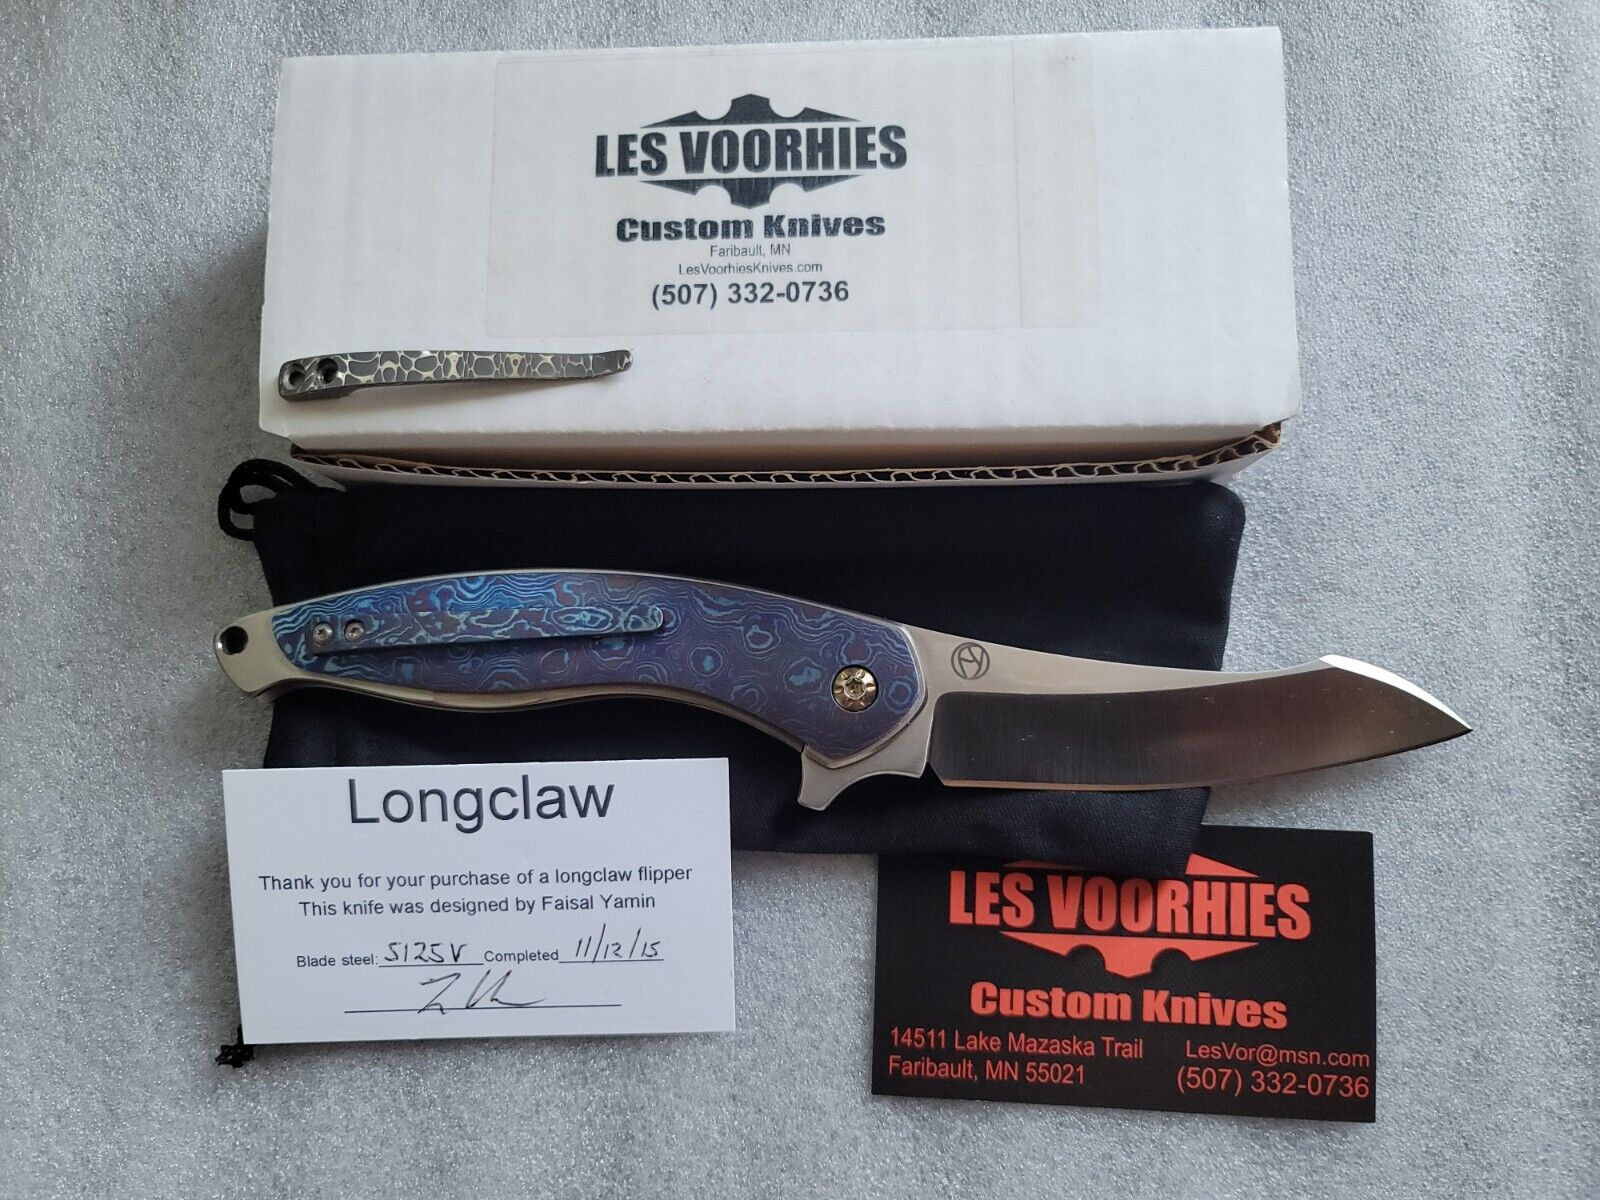 Les Voorhies & Faisal Yamin Longclaw, CPM-S125V, Fully Contoured Mokuti Overlays